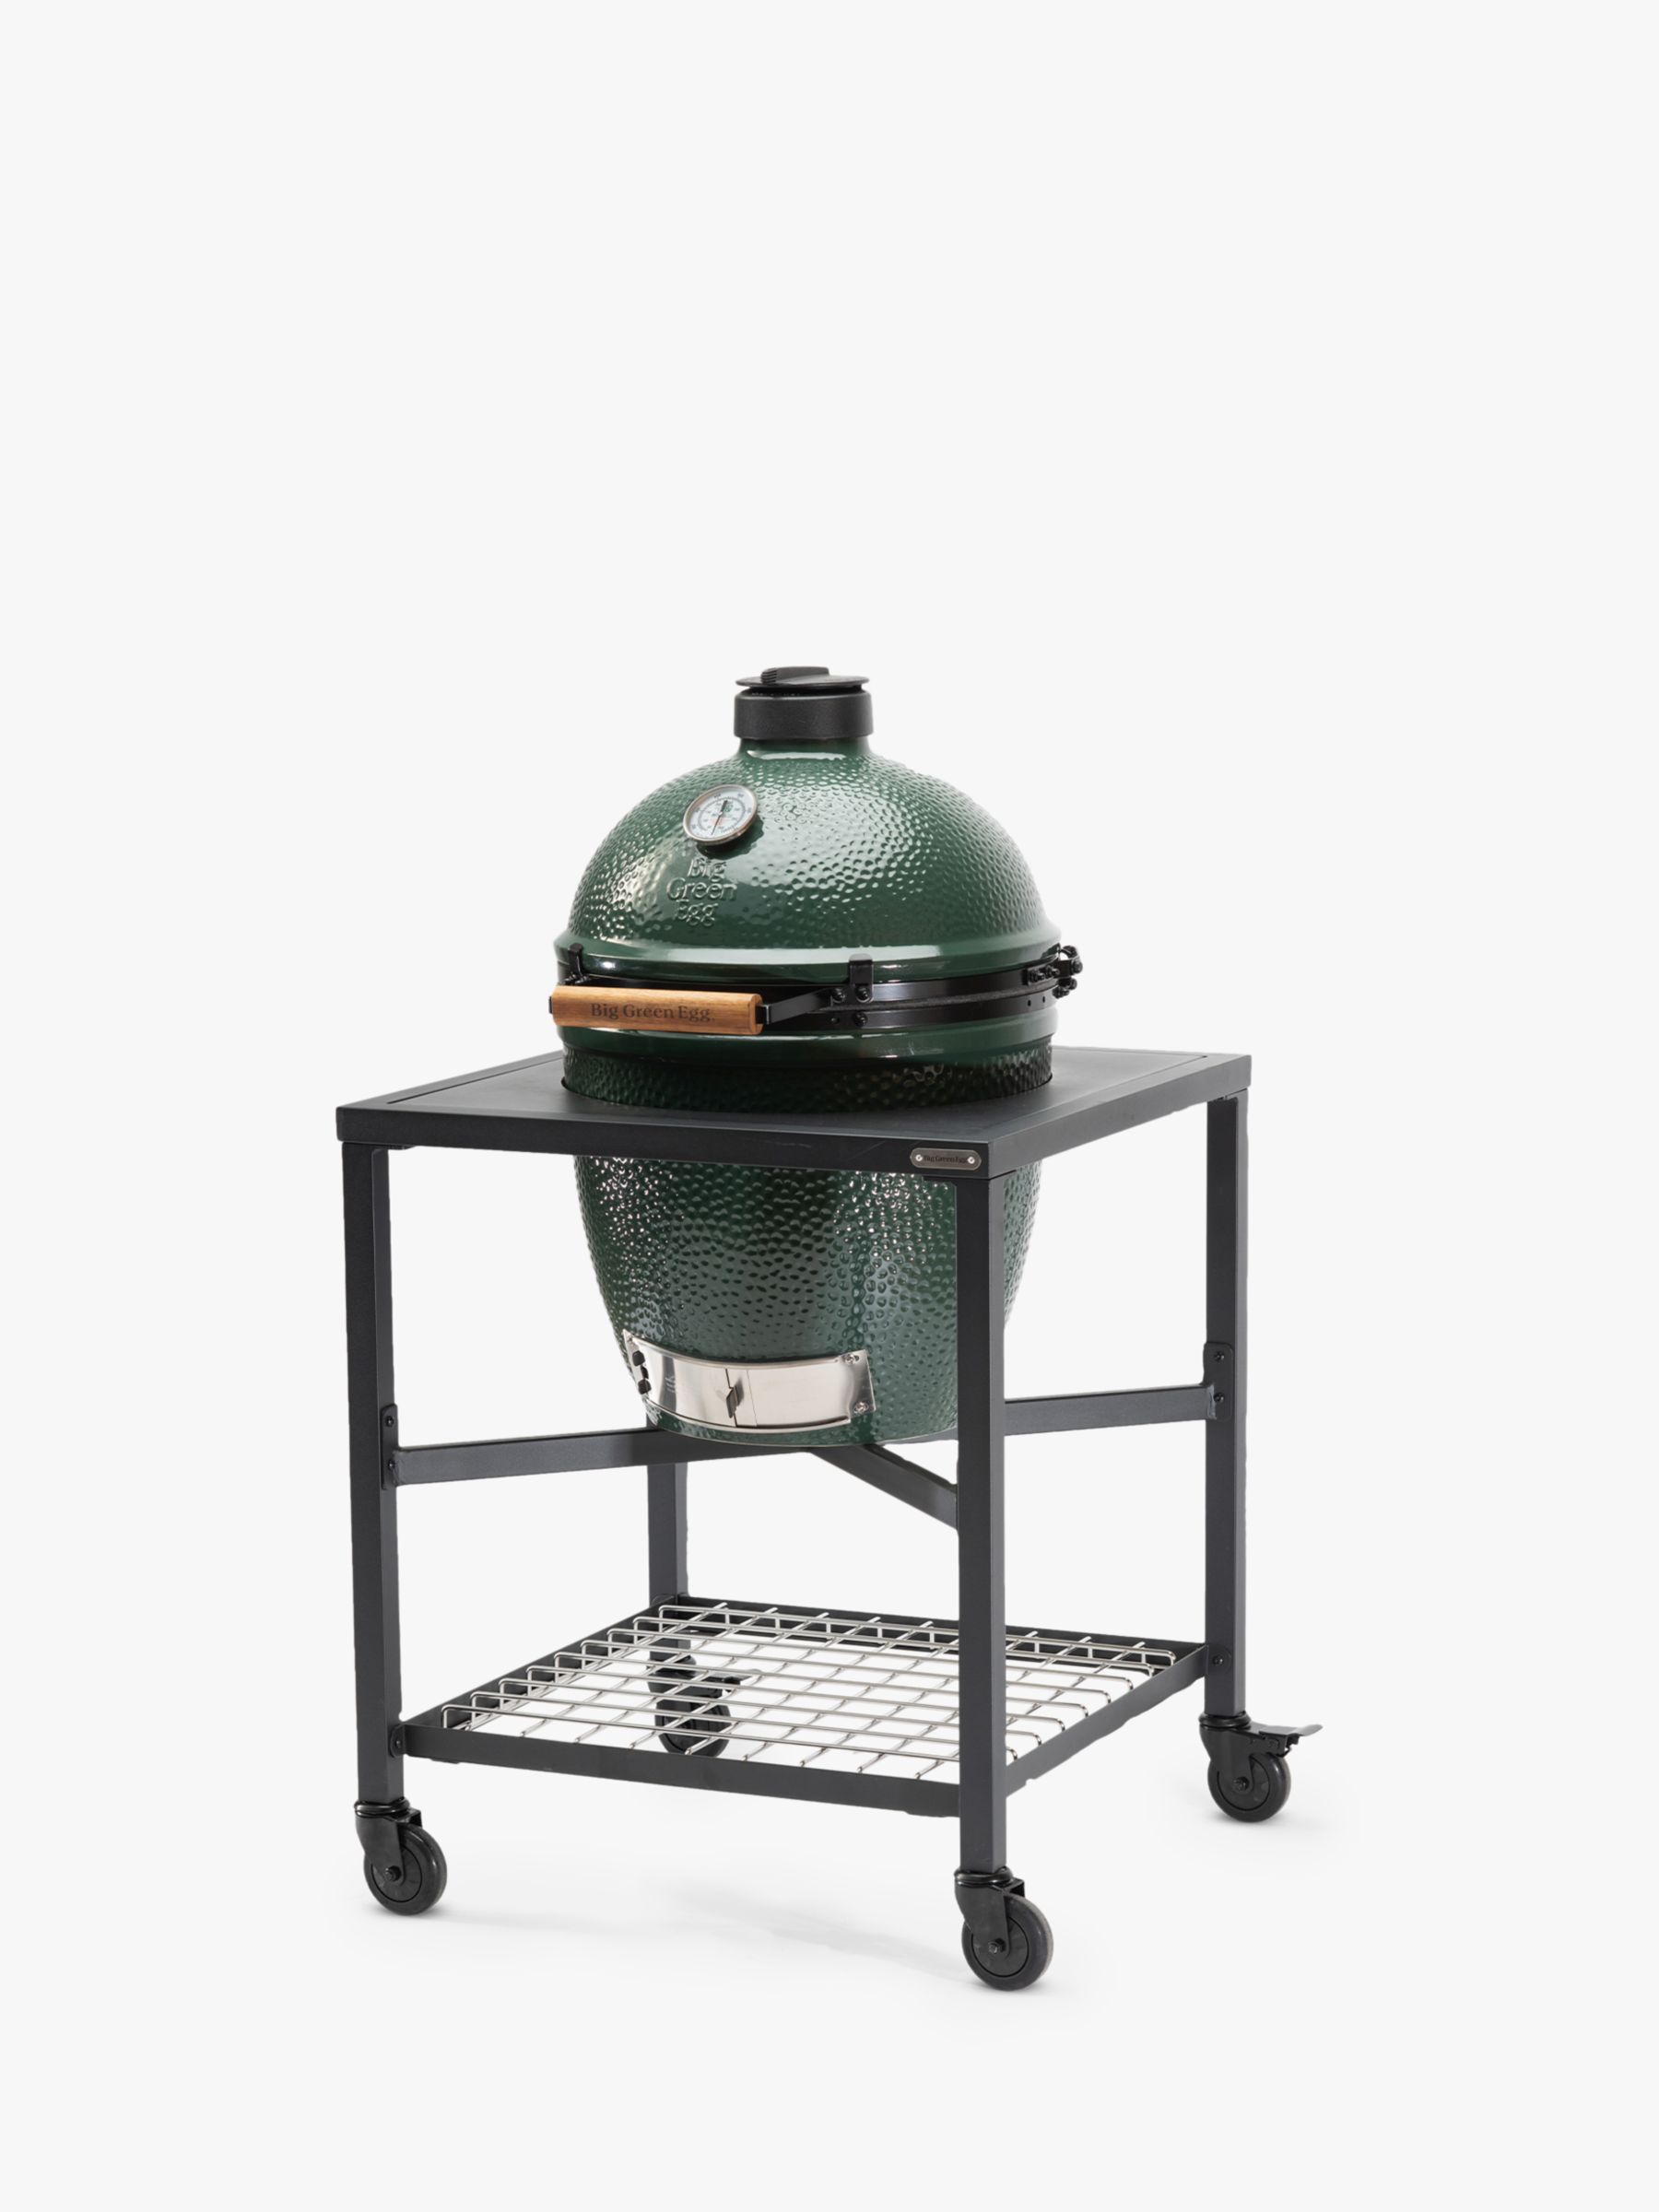 Alert Woud Napier Big Green Egg Large Egg BBQ and Modular Nest Bundle with ConvEGGtor & Cover